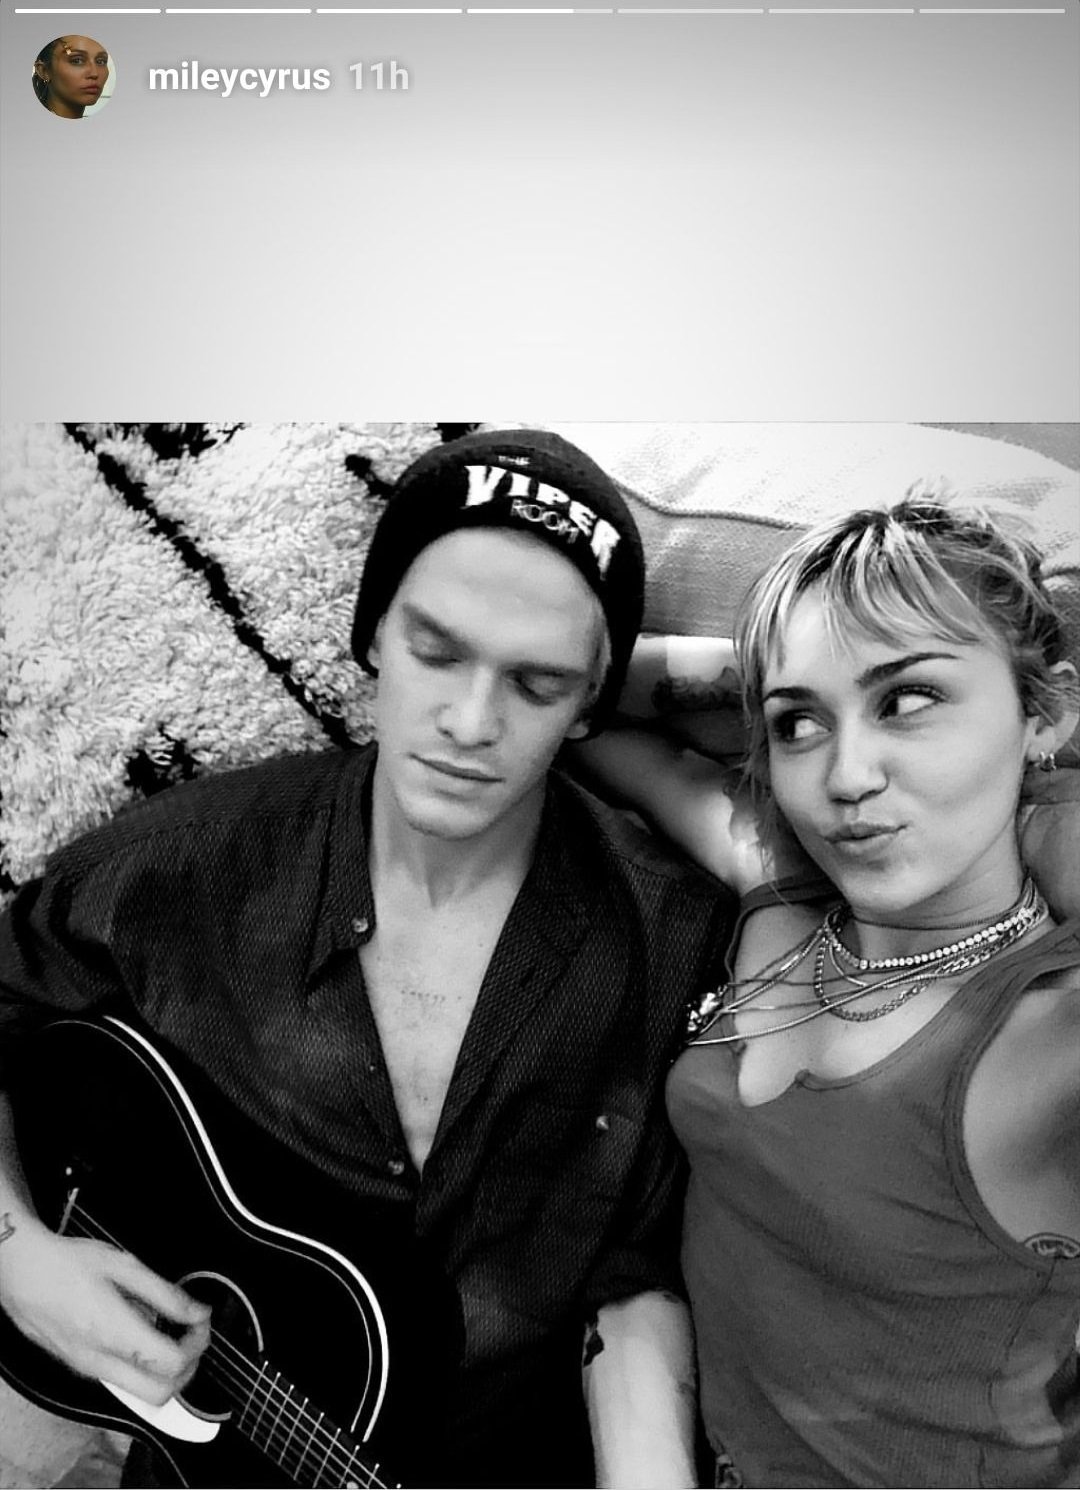 Miley Cyrus and Cody Simpson hanging out on a cozy couch in what appears to be her family’s home. | Photo: Instagram/mileycyrus